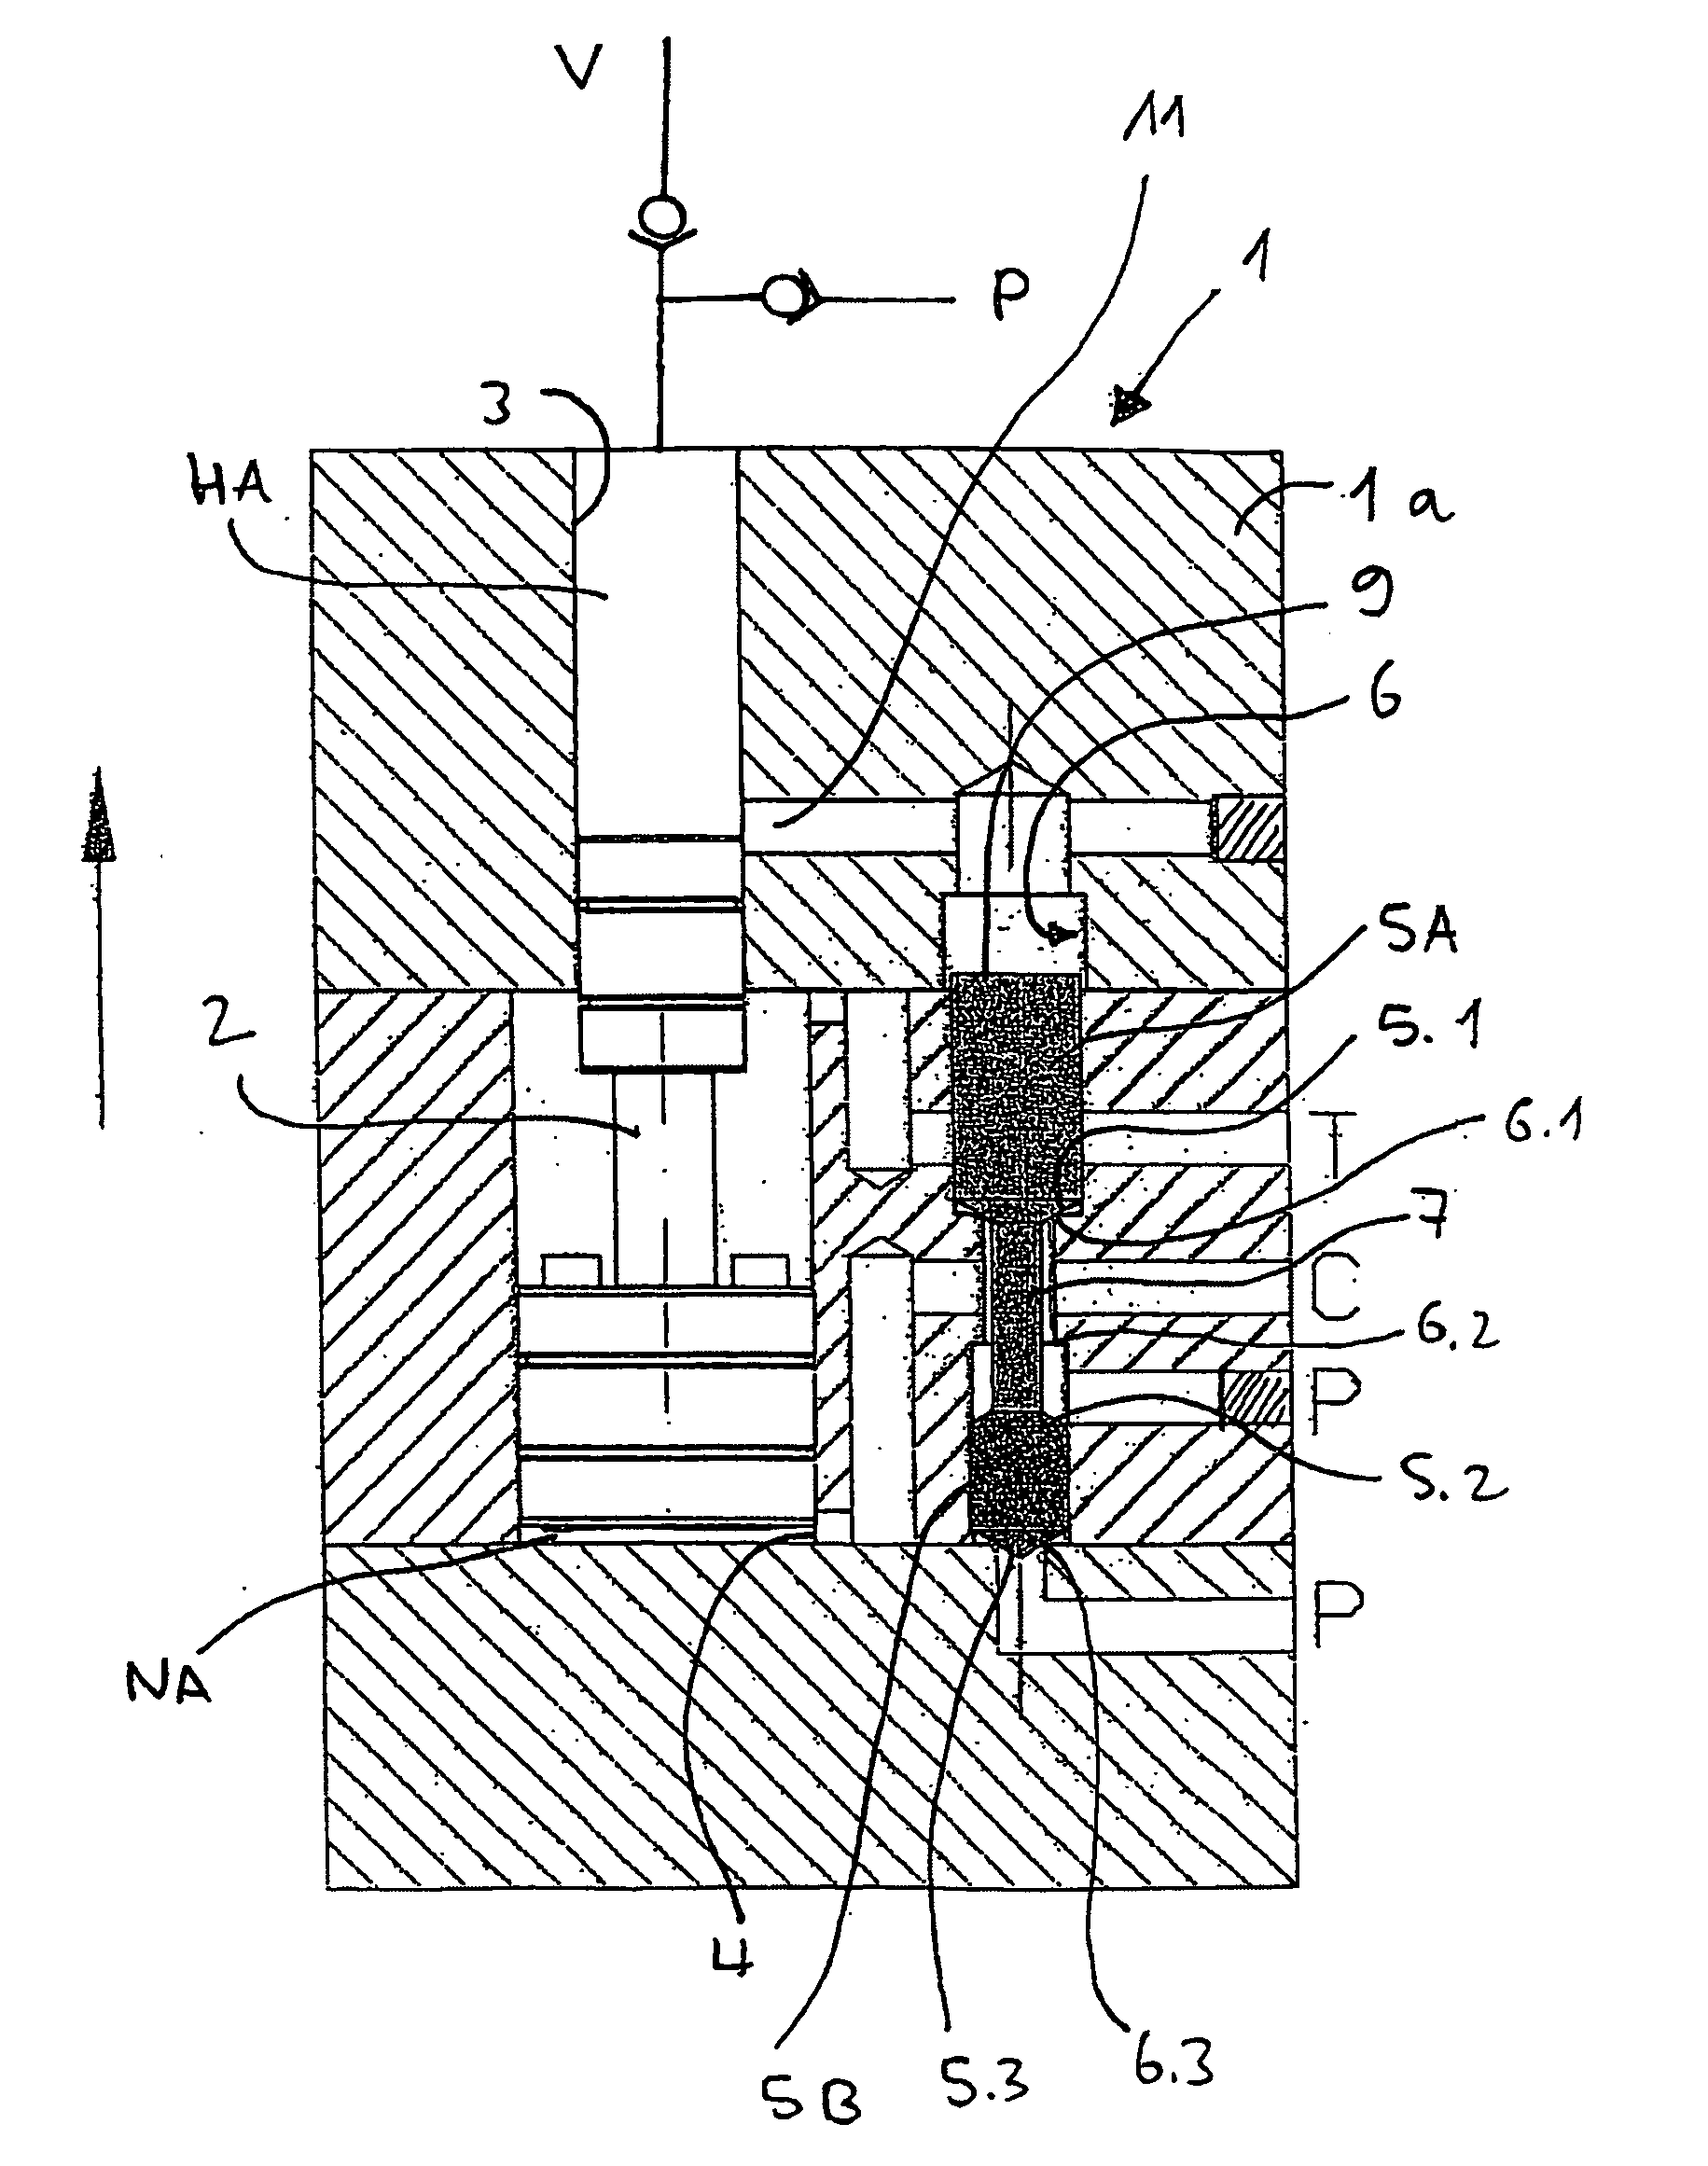 Pressure booster with double-seat valve